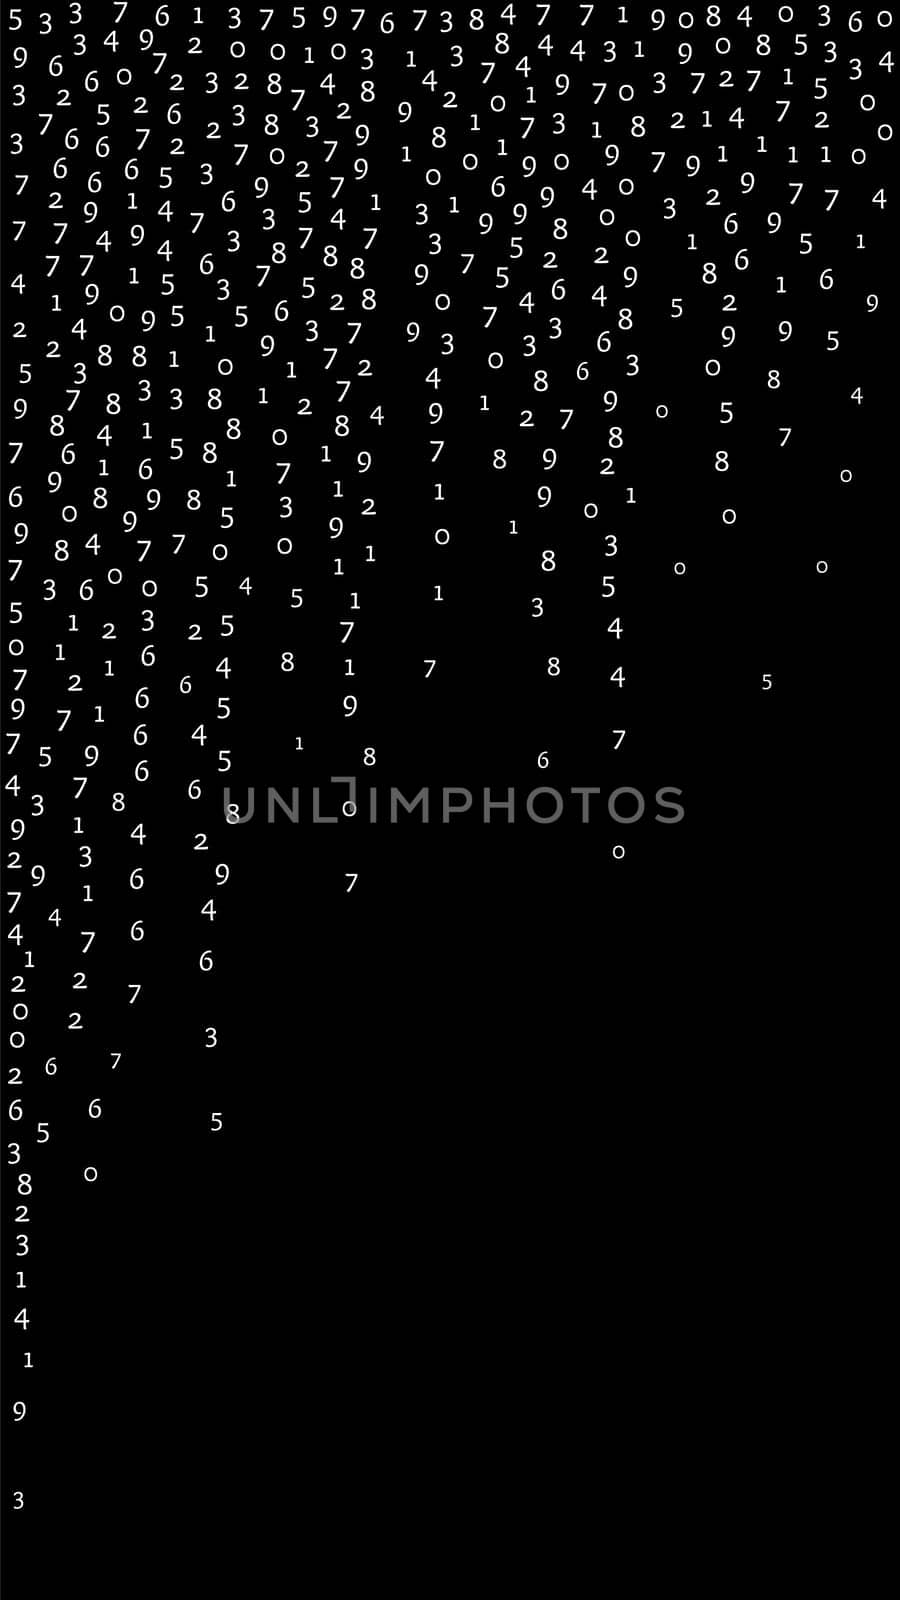 Falling numbers, big data concept. Binary white orderly flying digits. Gorgeous futuristic banner on black background. Digital illustration with falling numbers.